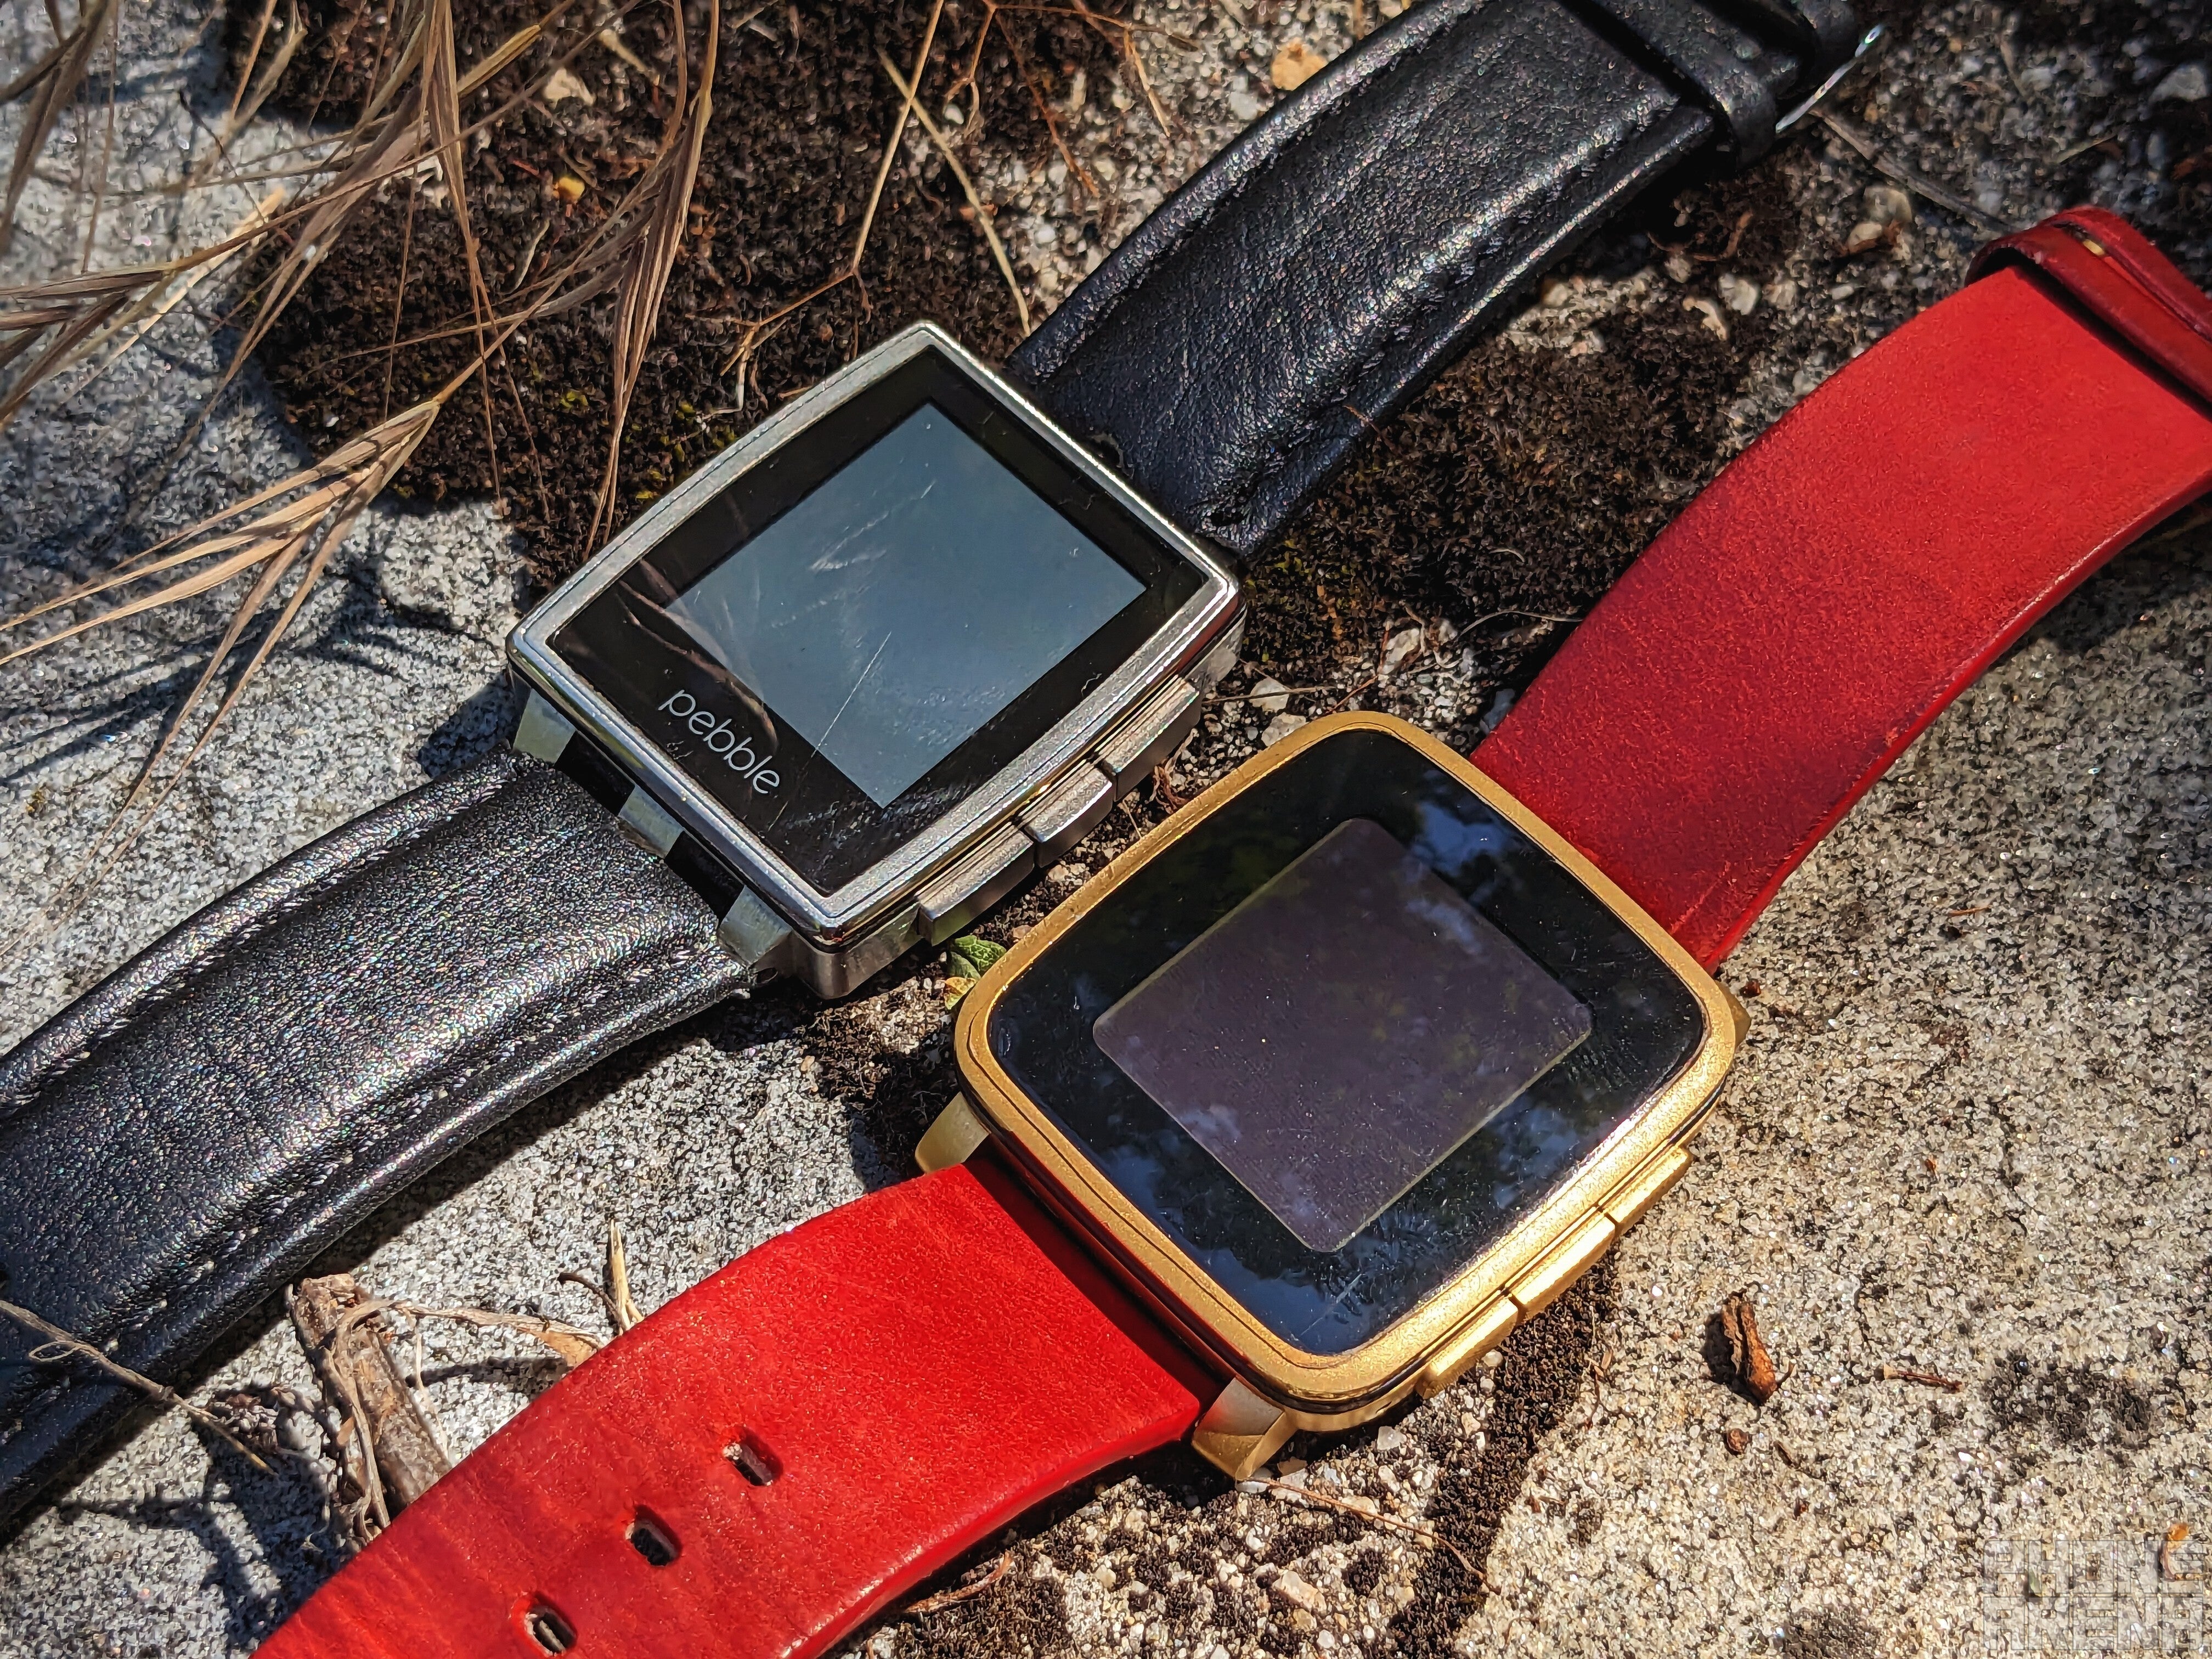 On the left, you can see my first Pebble Steel, which still works. On its right is the Pebble Time Steel. | Image credit - PhoneArena - Pebble crushed the competition, so beating Samsung is all it took to be the Smartwatch King?